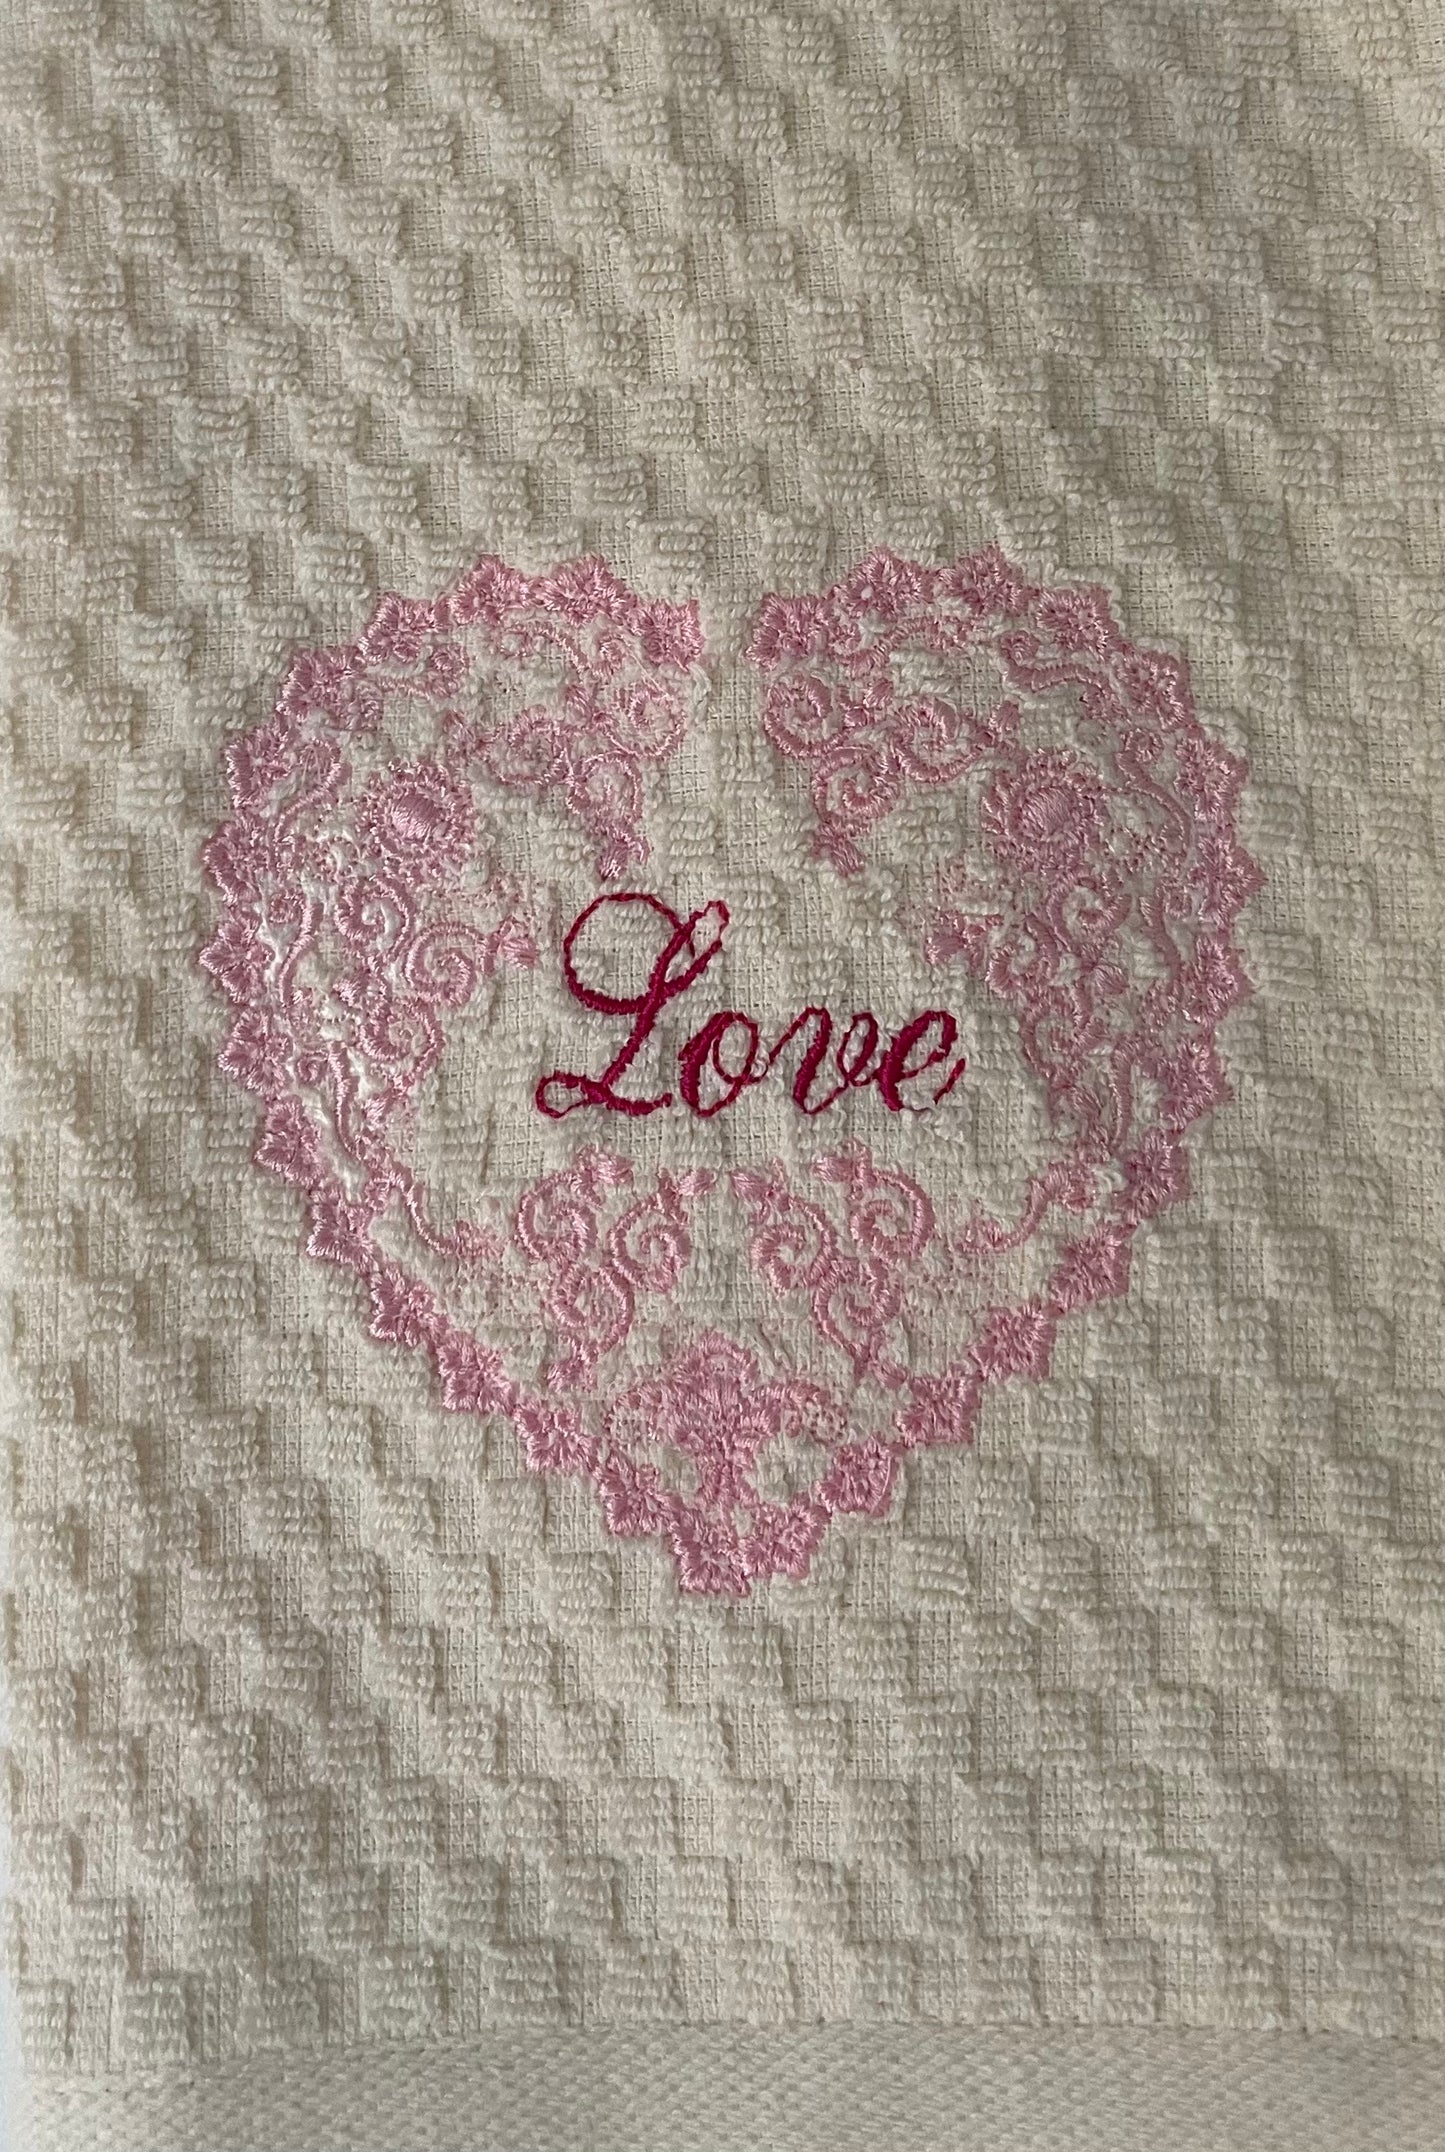 Embroidered Heart with Love Kitchen Towel